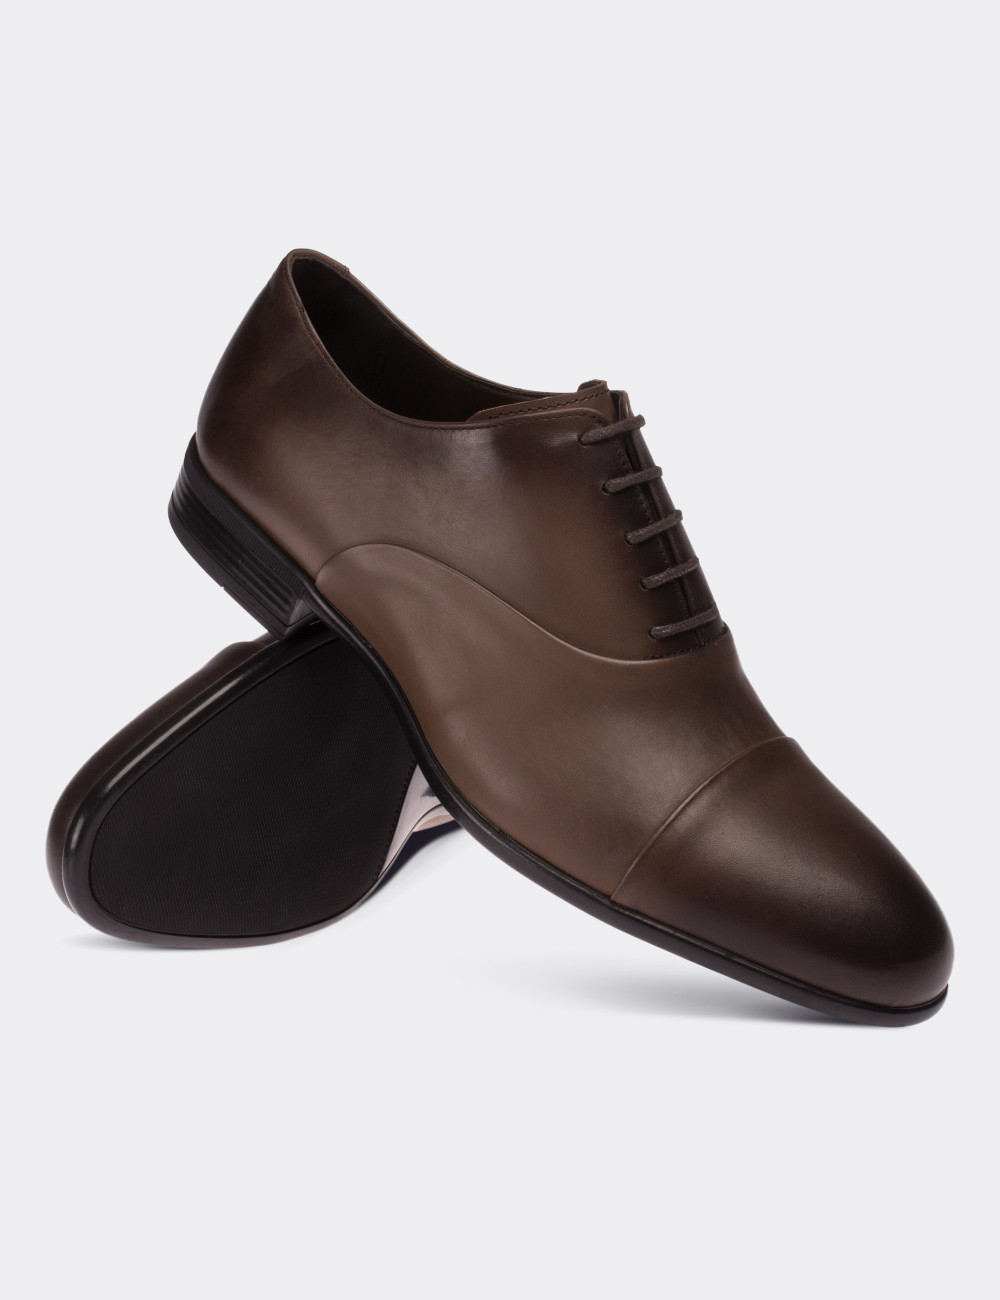 Sandstone  Leather Classic Shoes - 01026MVZNC01